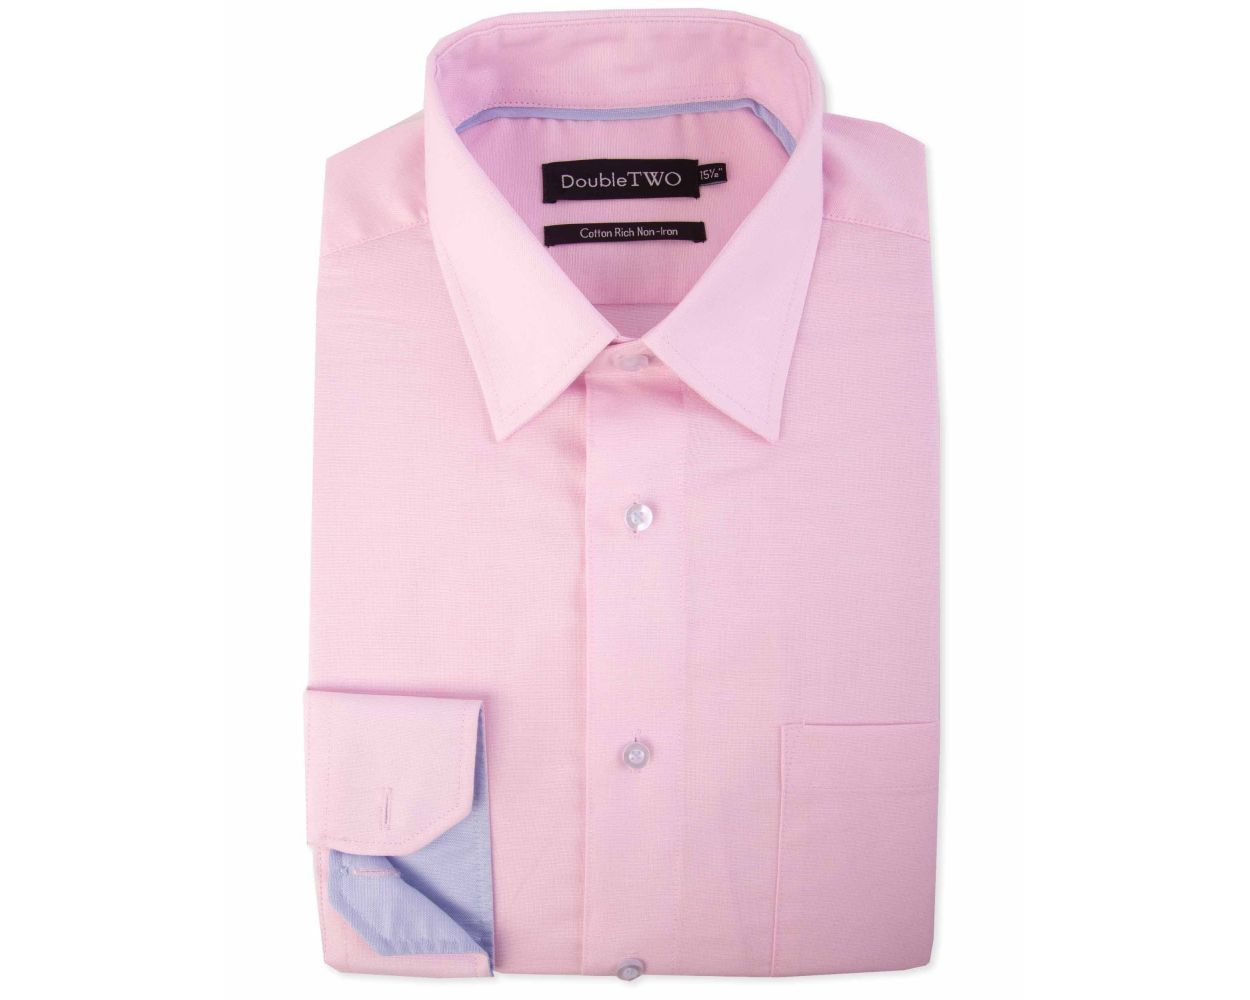 Men's Pink Oxford Formal Shirt | Double TWO